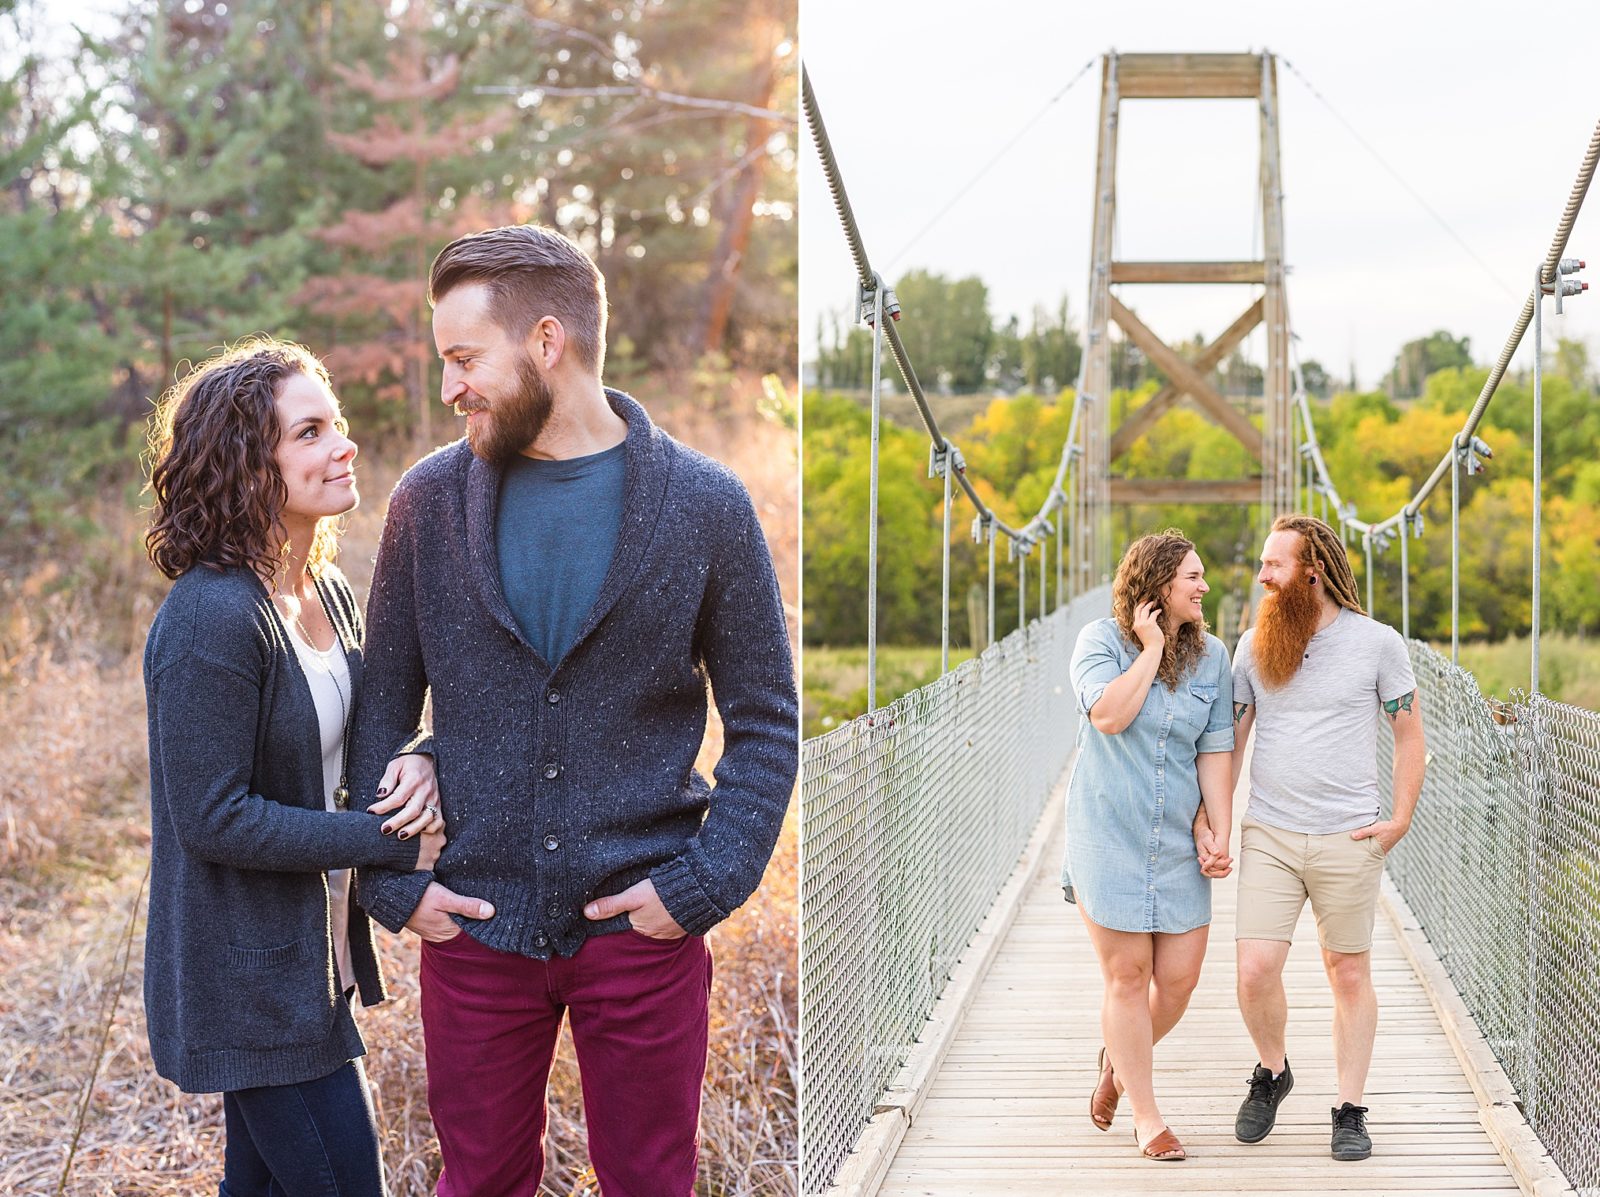 what to wear for couples photos - keep equal style of outfits